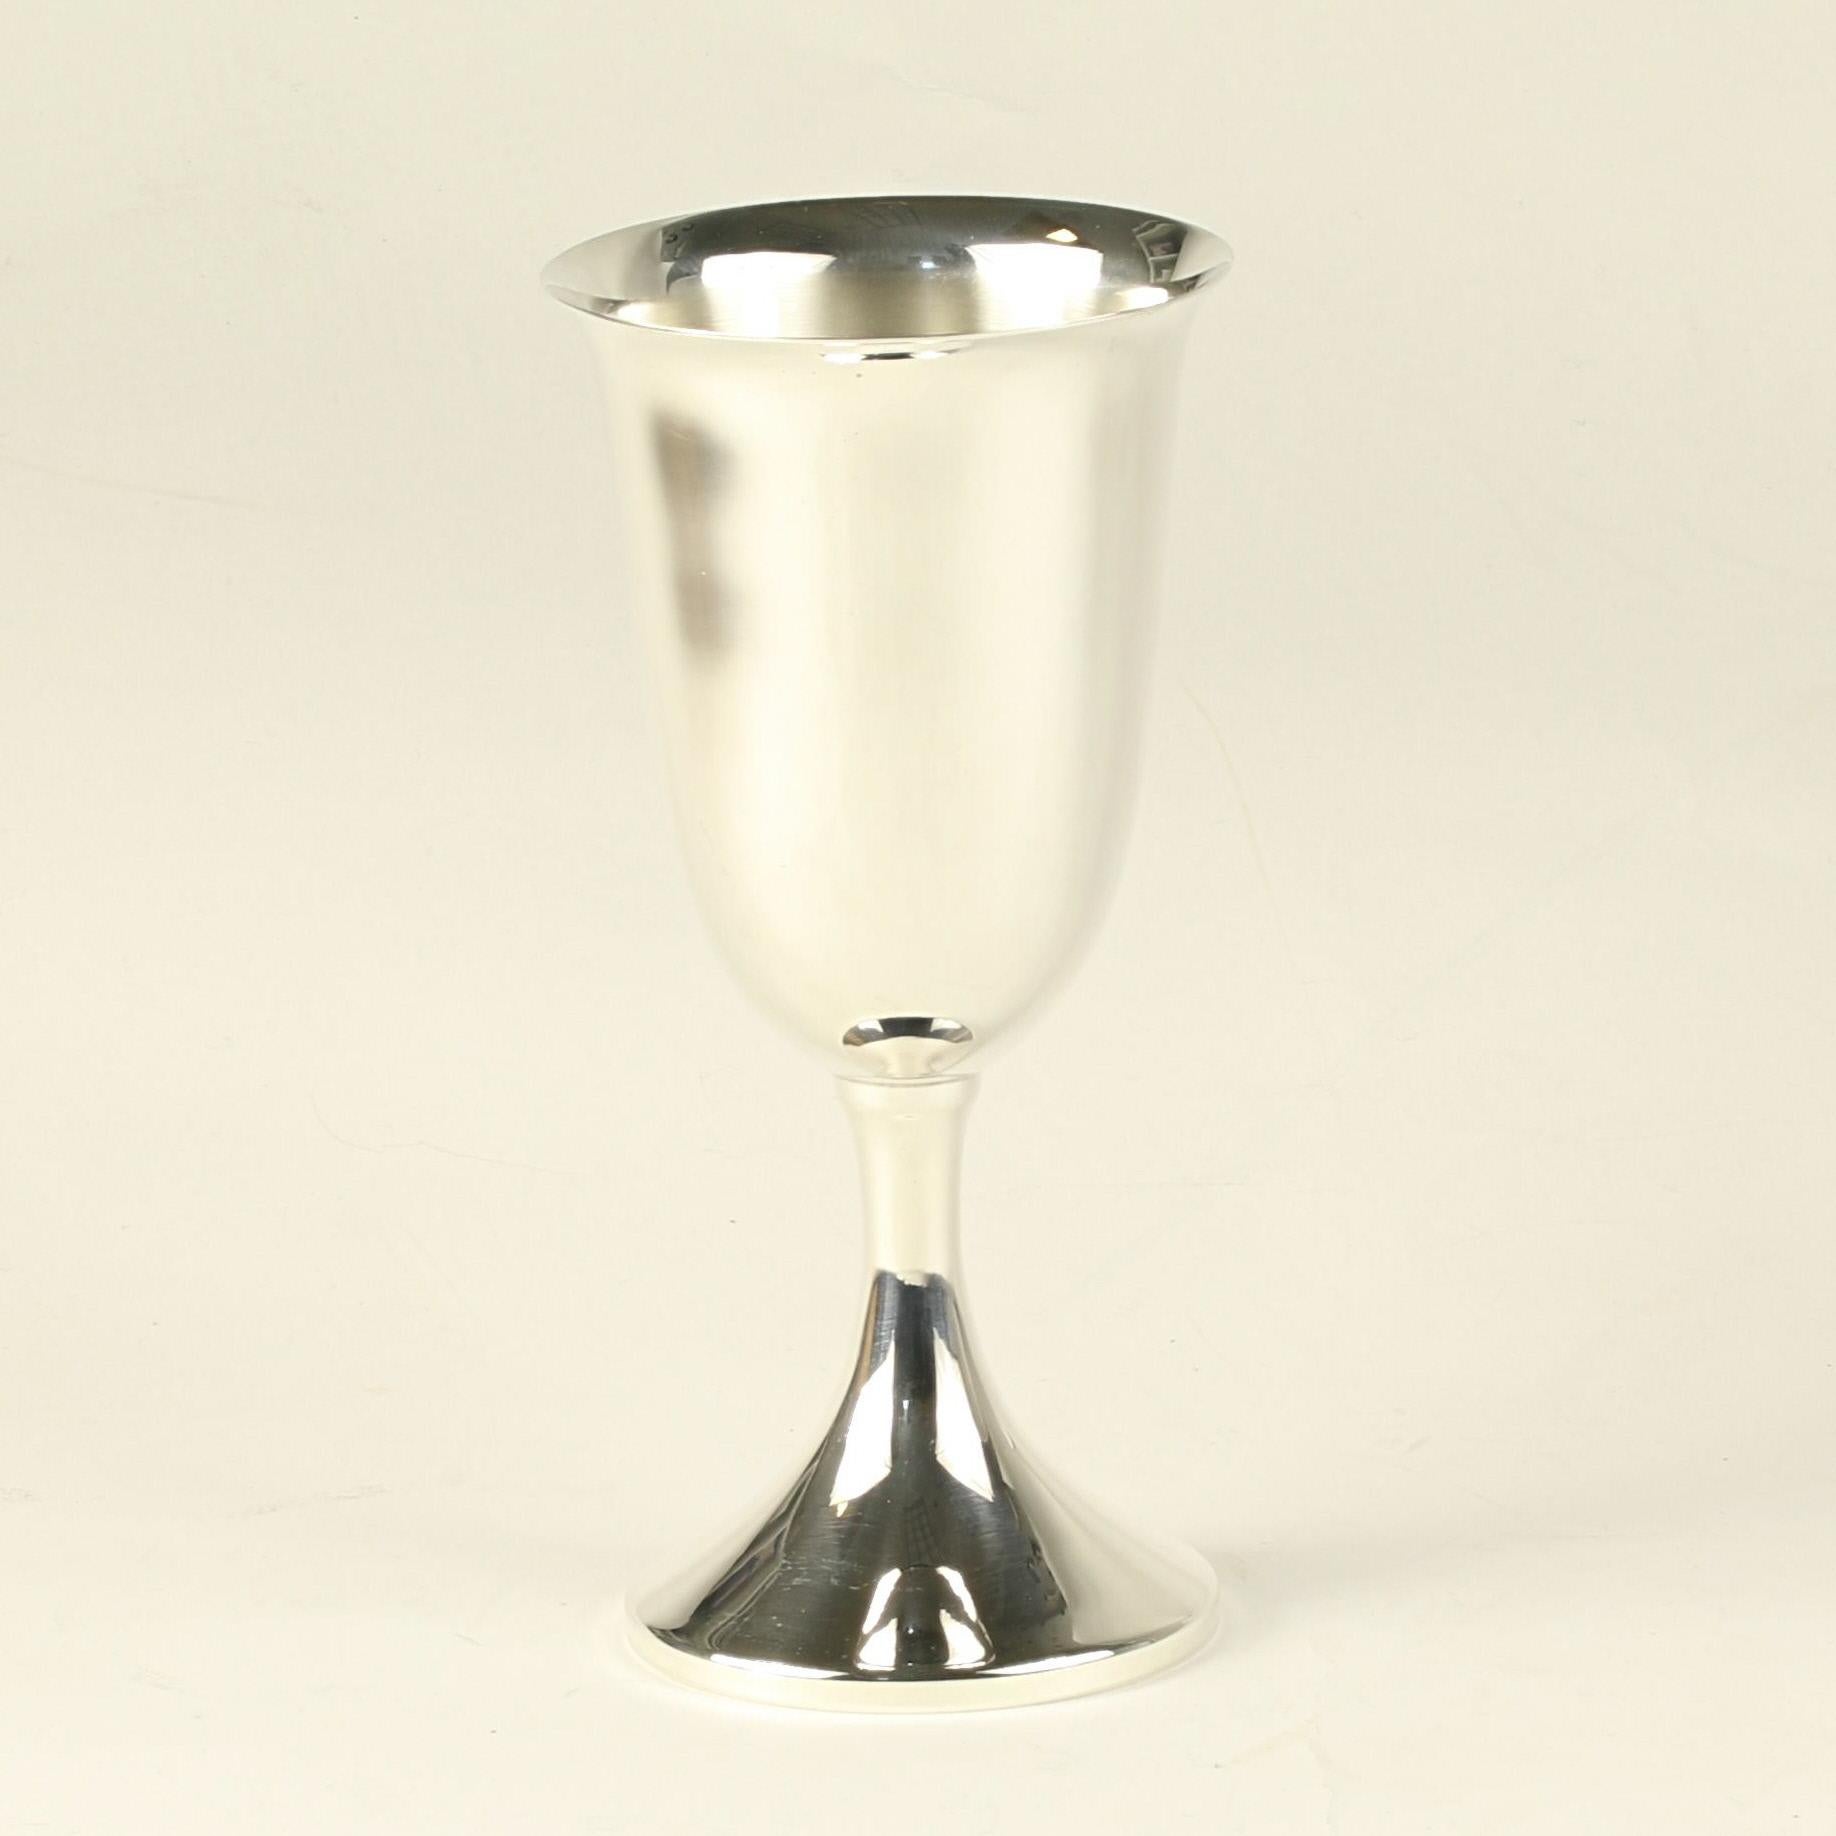 Item: Set of 12 Wine / Water Goblets
Brand: J.E. Caldwell
Monogram: No
Stamps: J.E. Caldwell, Sterling
Metal Content: Sterling Silver
Measurements: 6 11/16